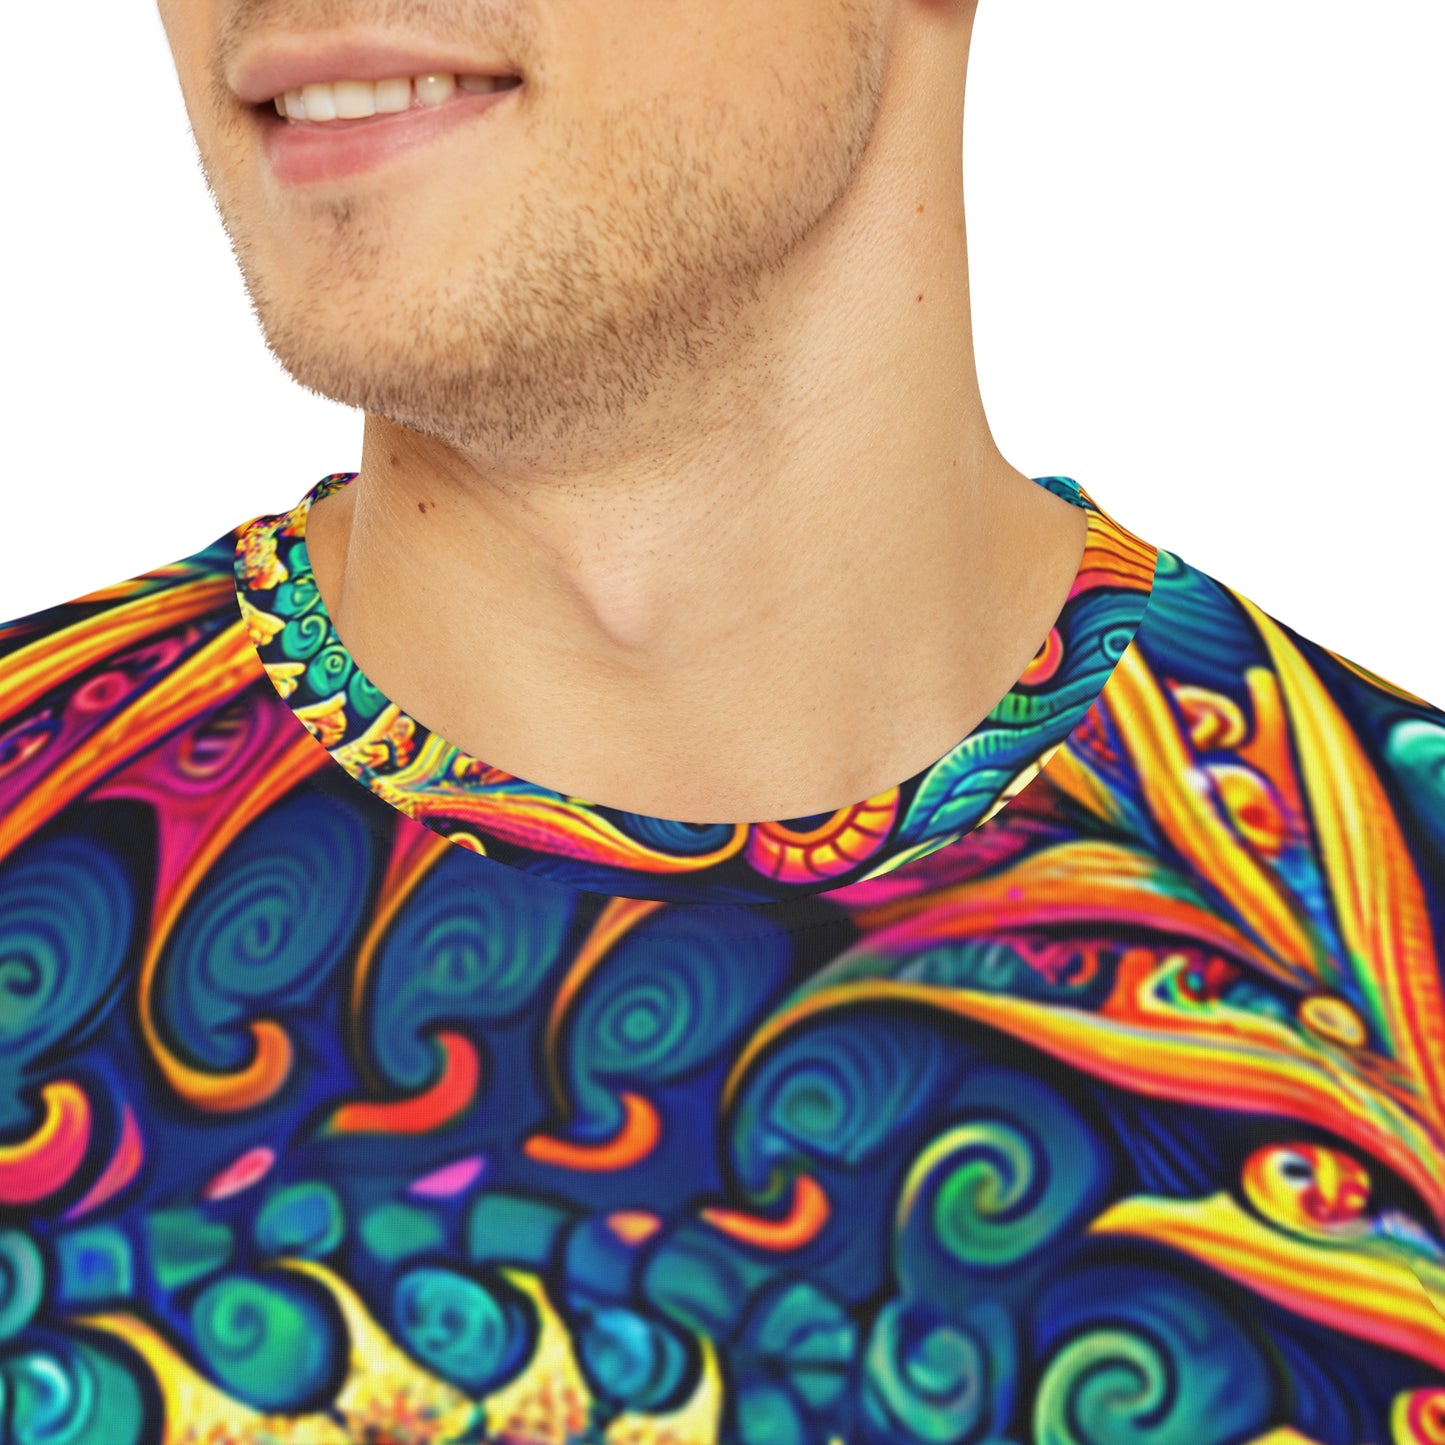 Close-up shot of the Psychedelic Peacock Swirls Crewneck Pullover All-Over Print Short-Sleeved Shirt yellow blue green red peacock swirl pattern worn by a white man